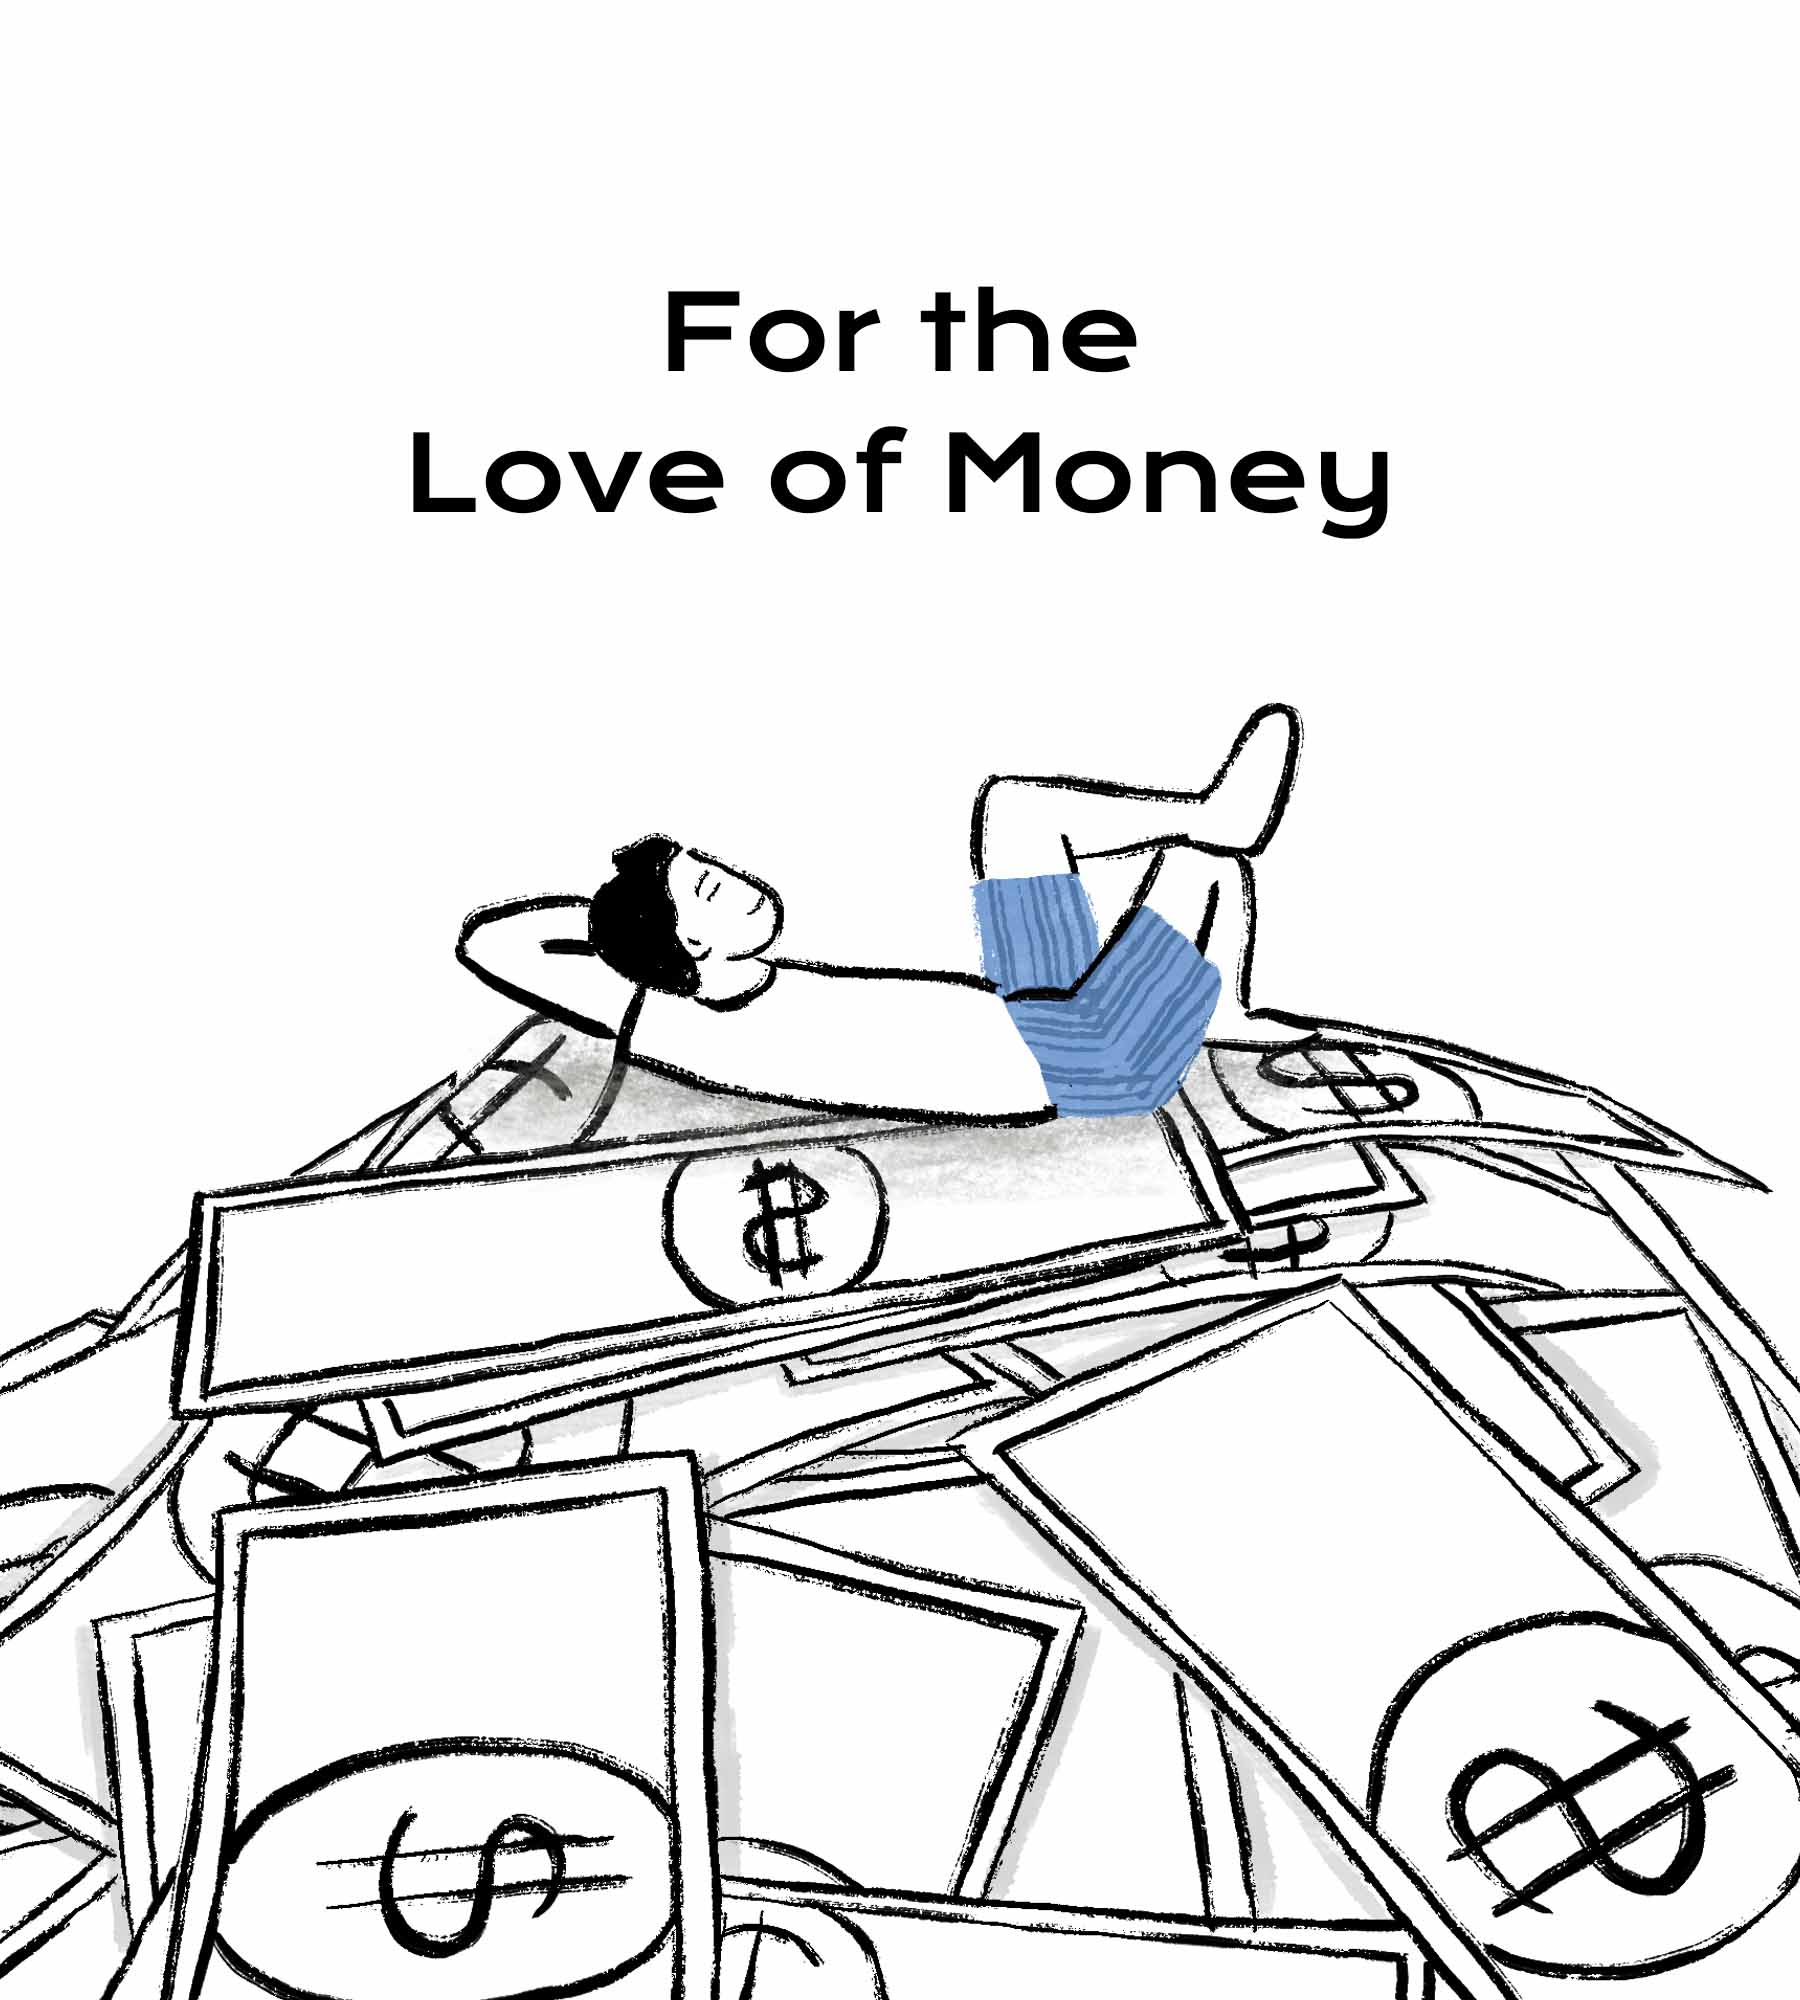 For the love of money; a man sleeps on top of a huge pile of cash.